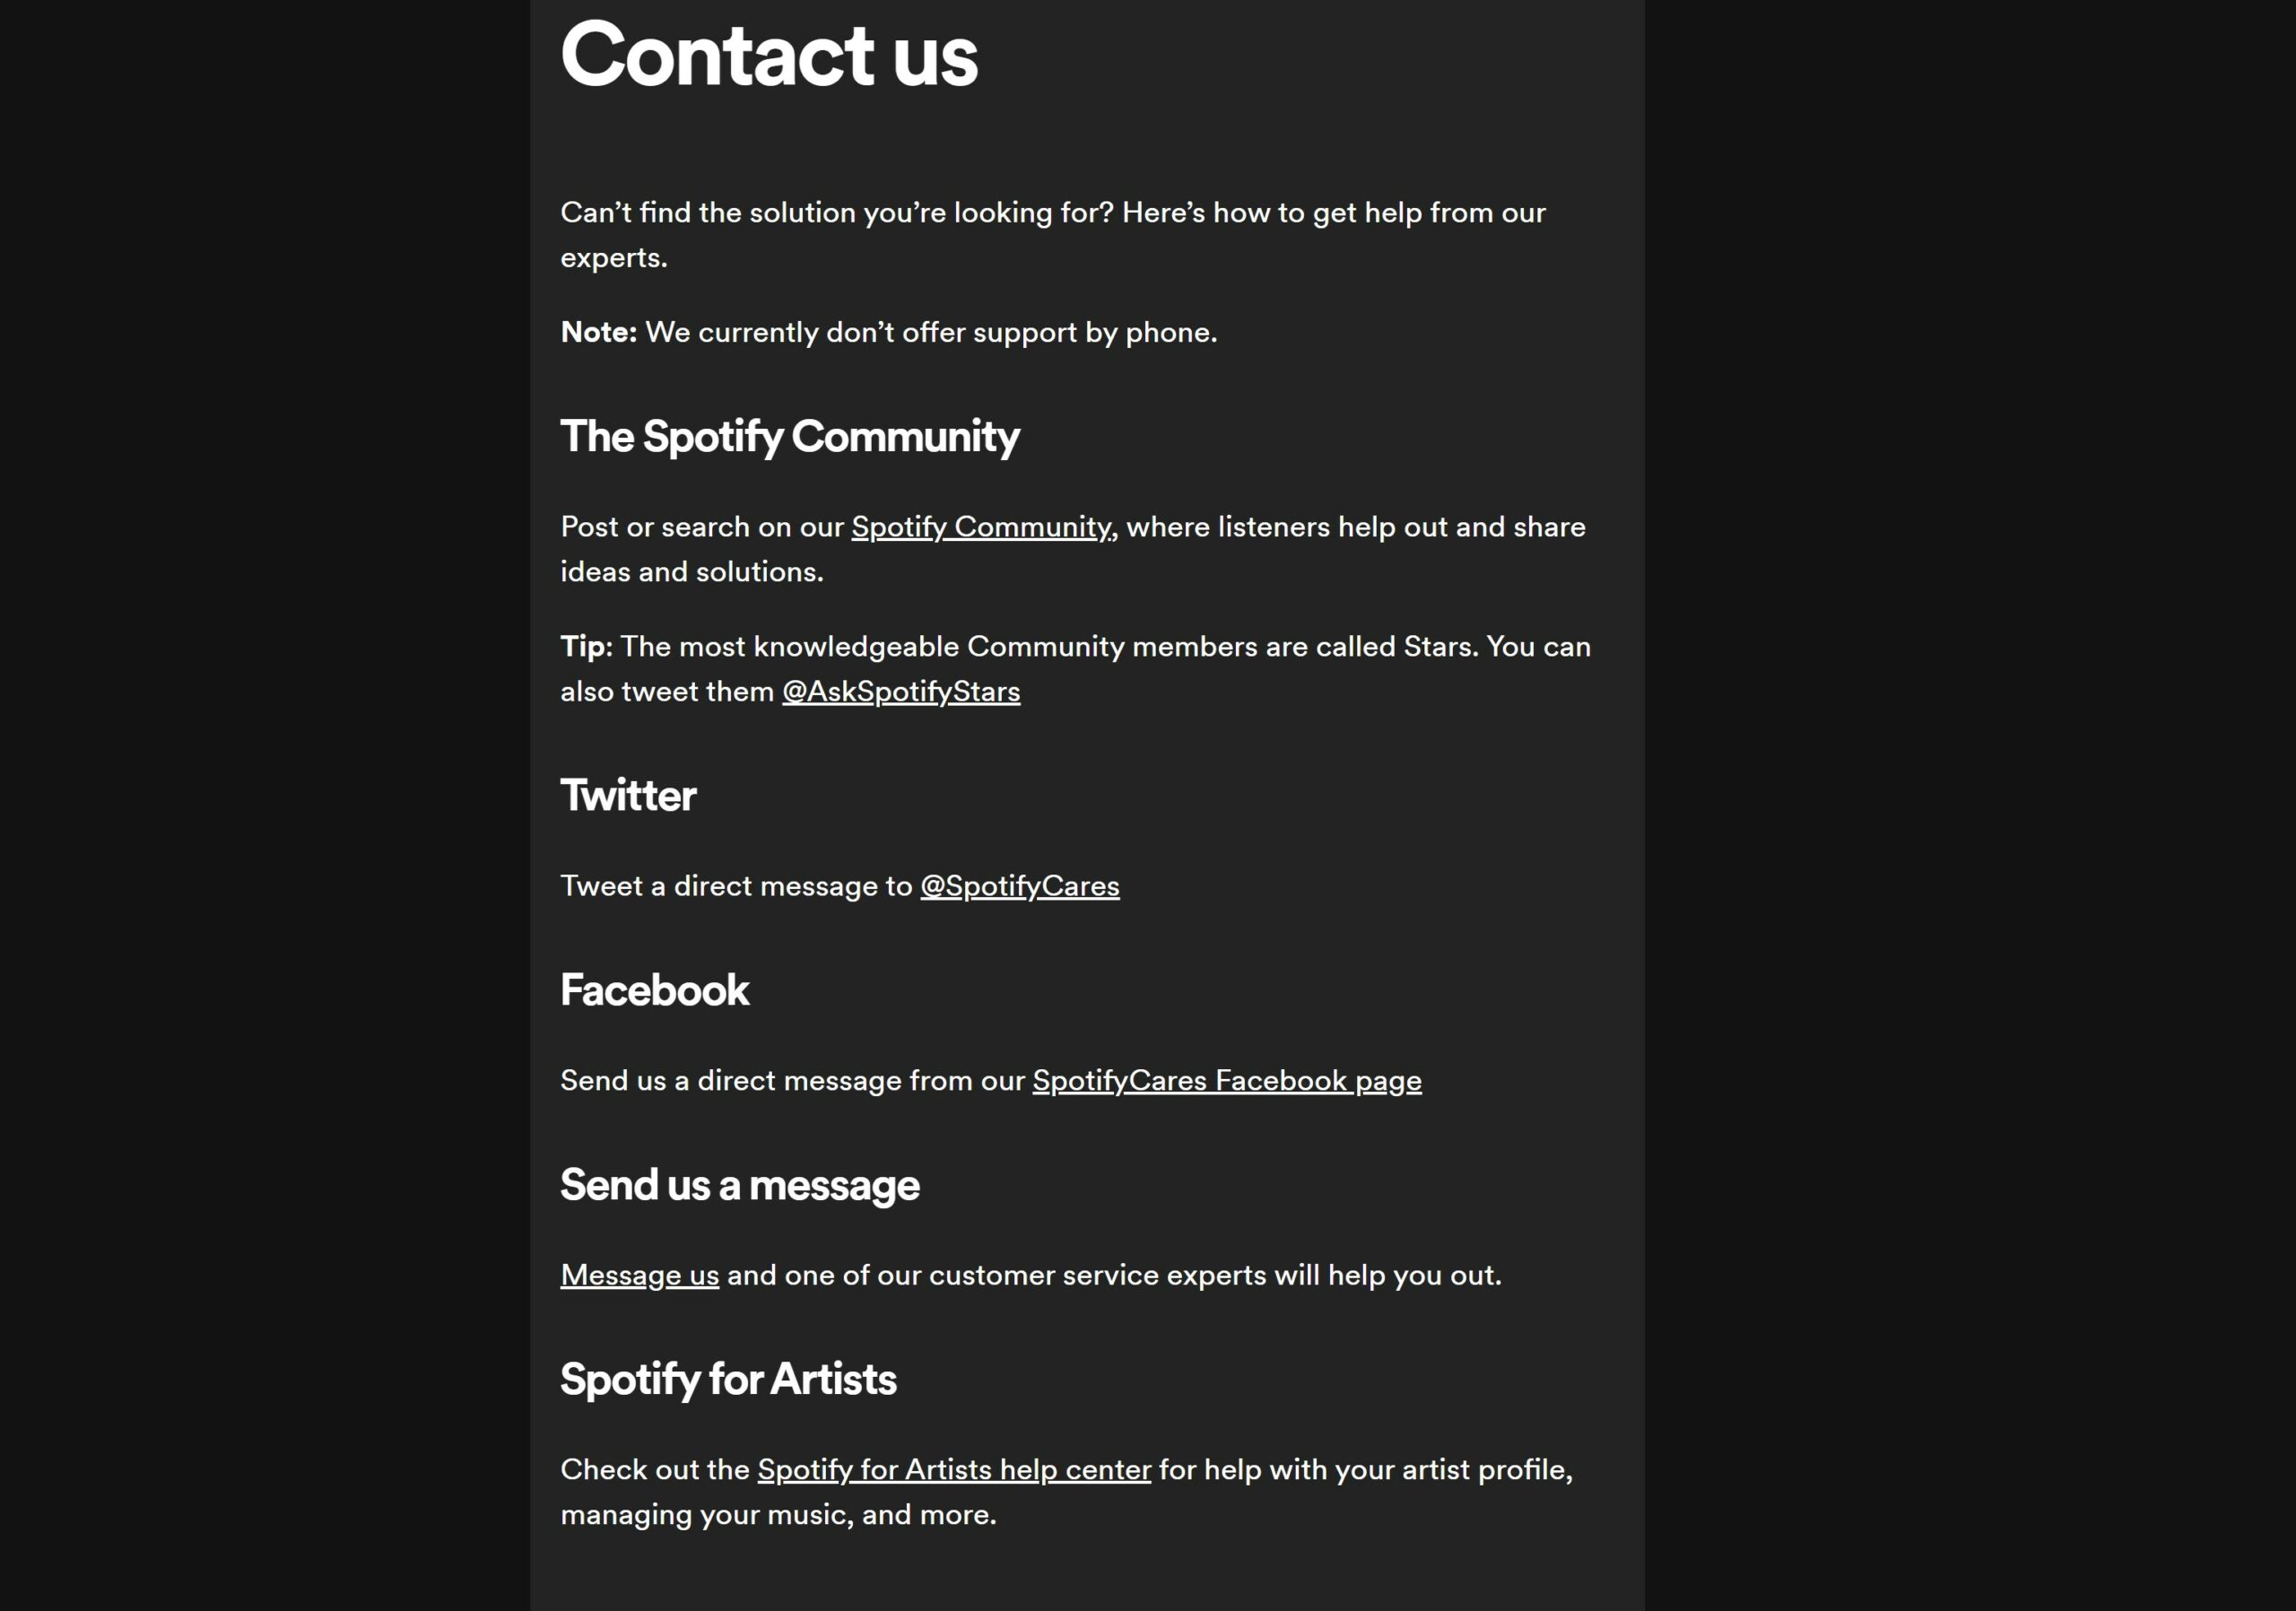 Spotify contact us page